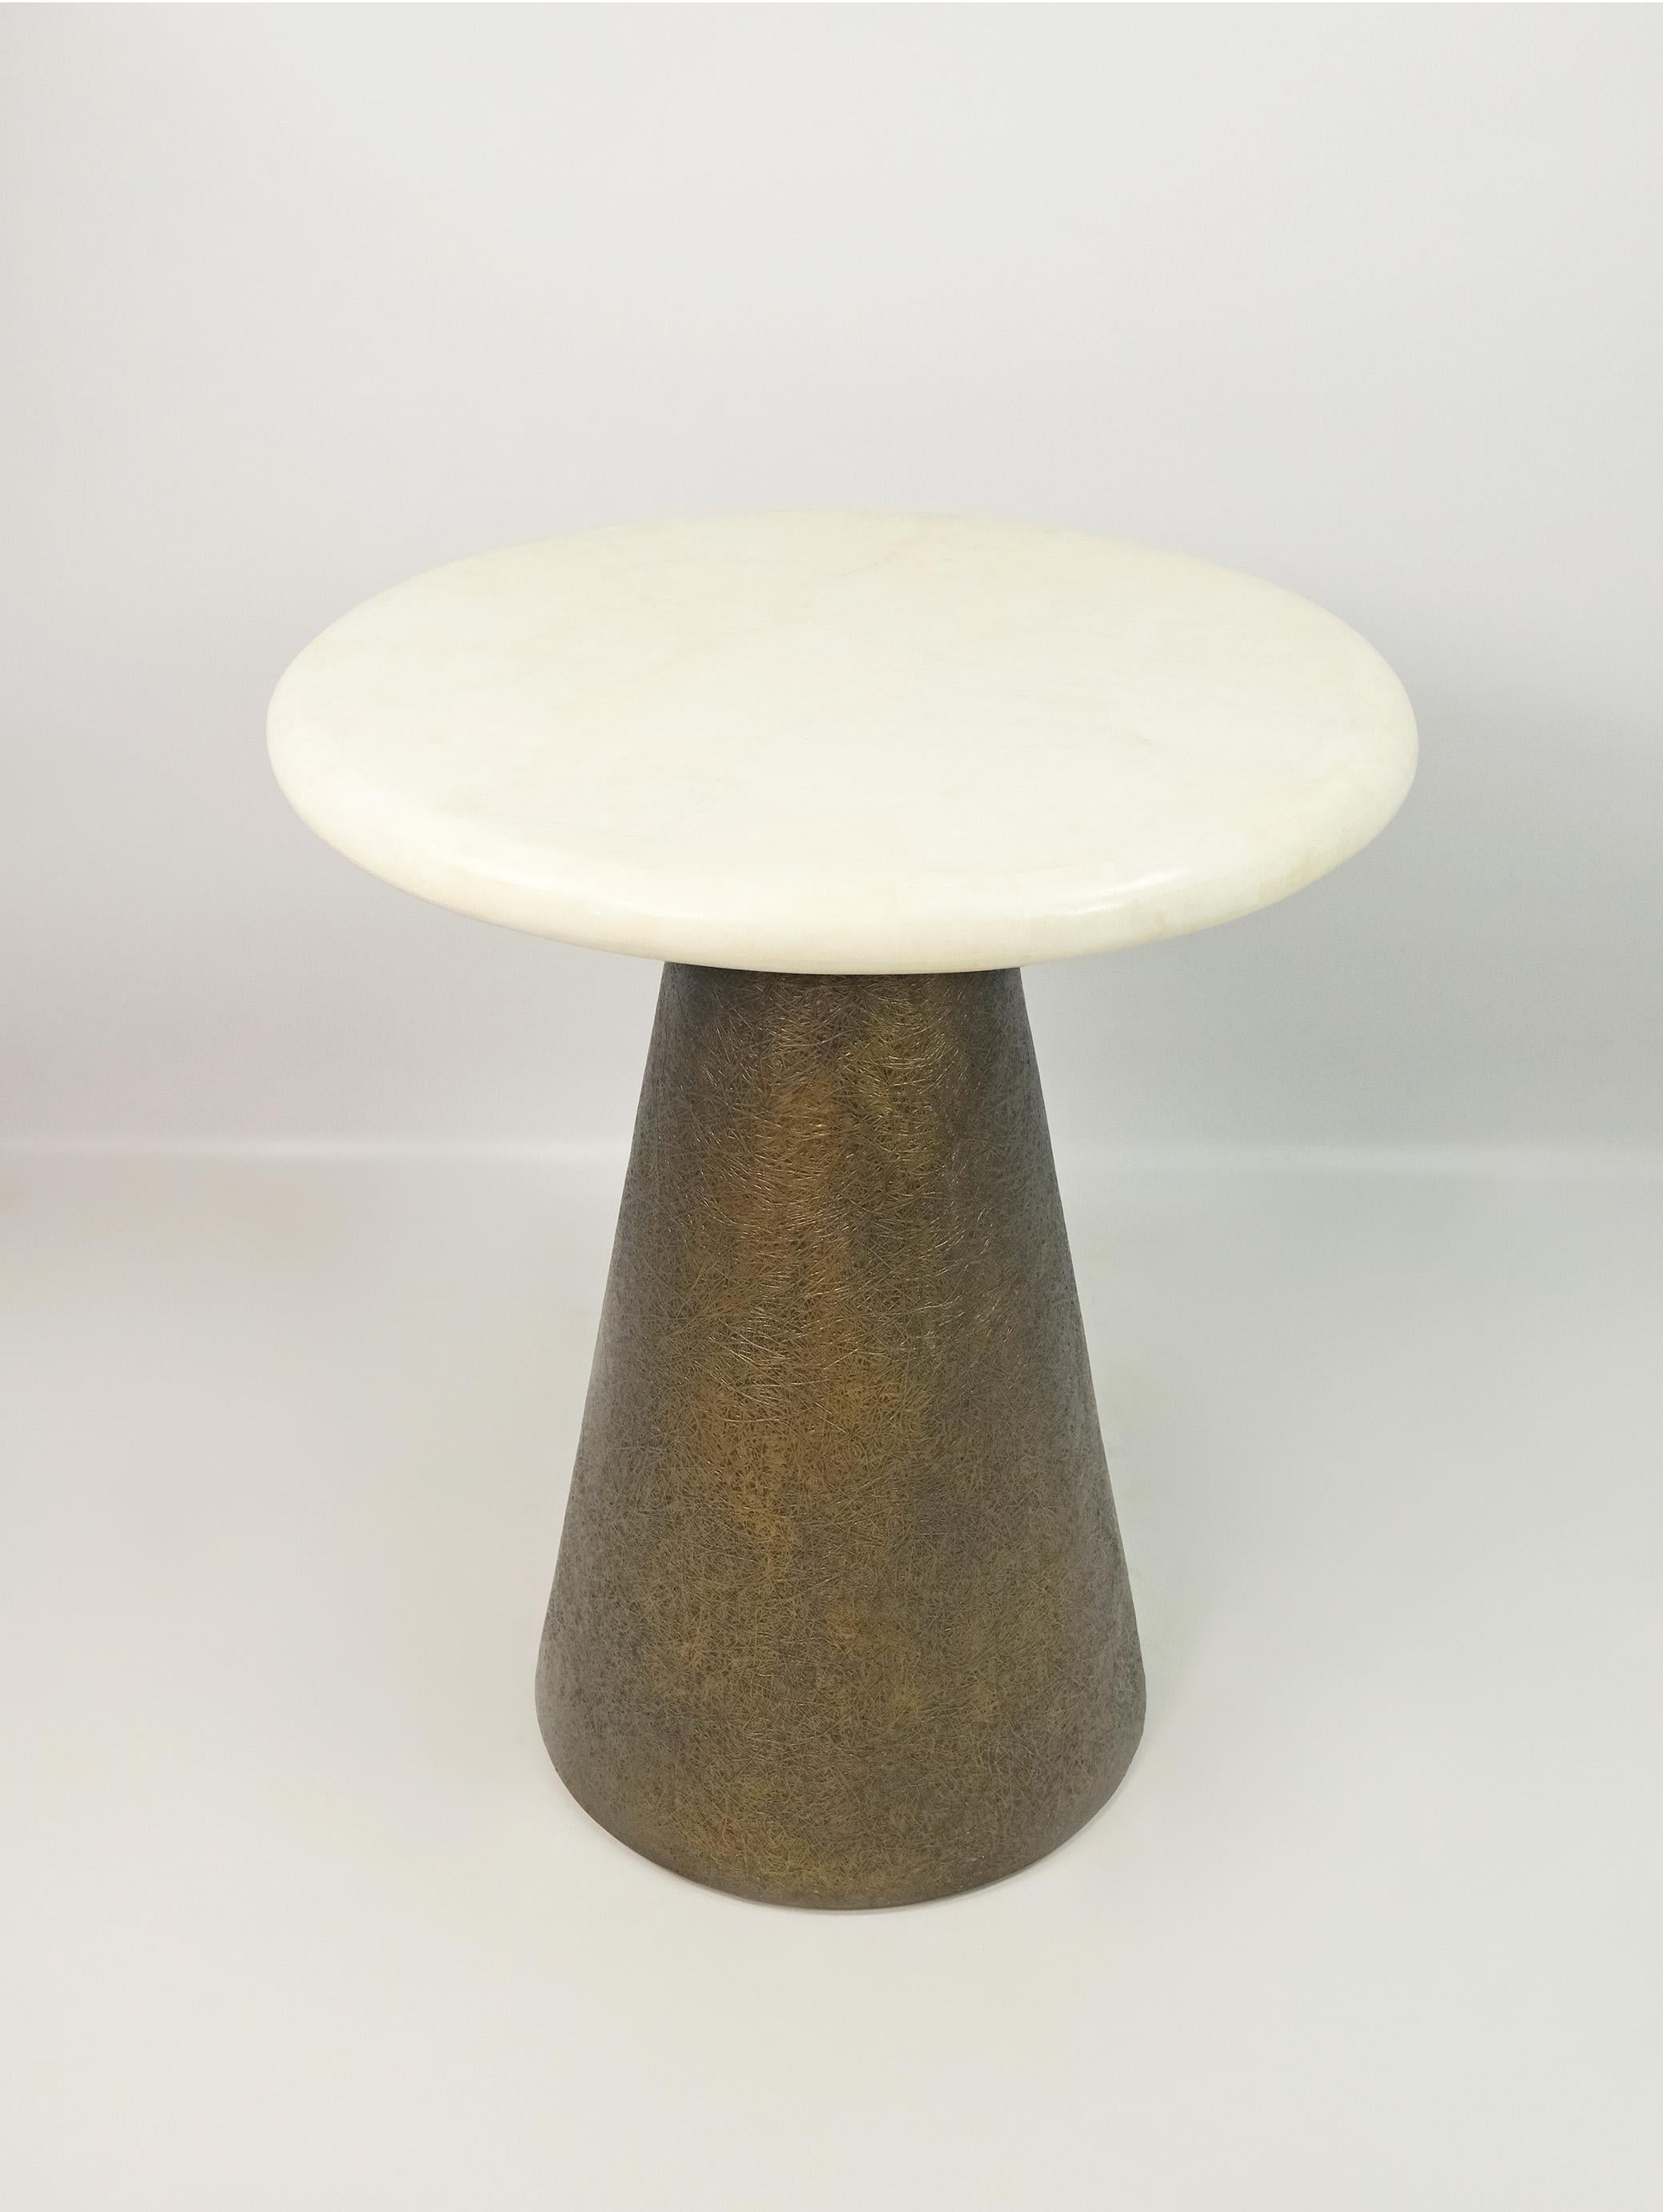 This side table is made of a round white rock crystal marquetry top.
The conical base is made of wood with a bronzed semi-raw glass fiber inlaying.
The semi raw finishing brings an interesting texture thanks to the nice rounded shape of the